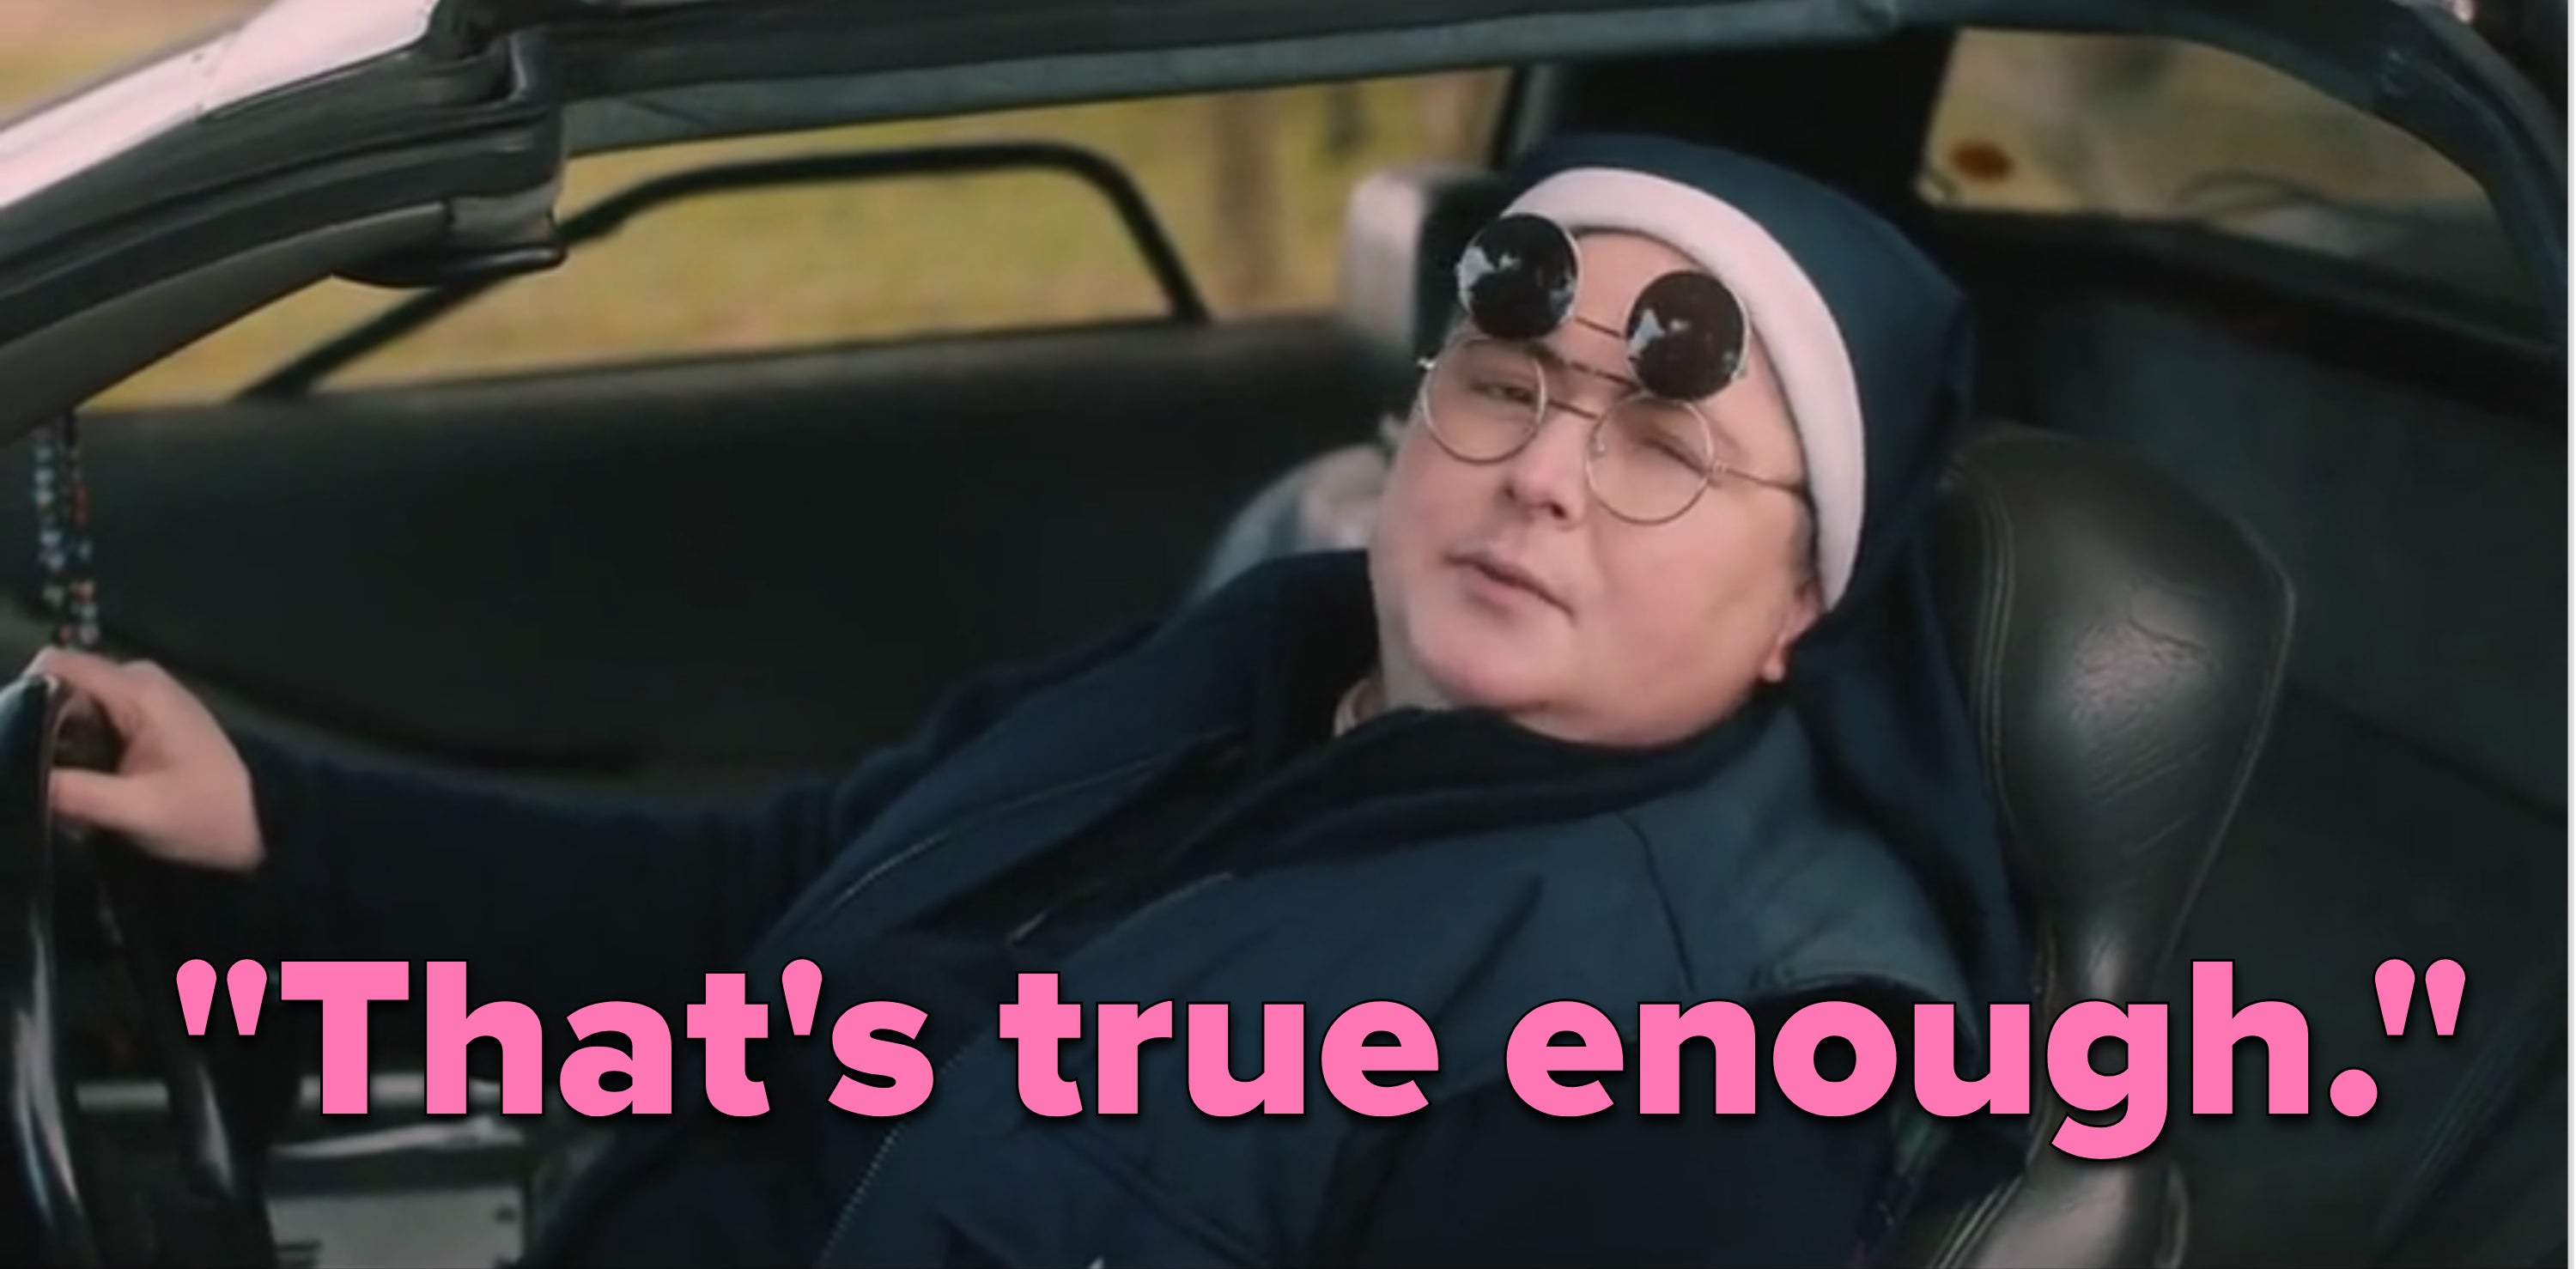 Sister Michael from &quot;Derry Girls&quot; sits in a car with flip-up sunglasses on. She looks out the window and says &quot;That&#x27;s true enough.&quot;